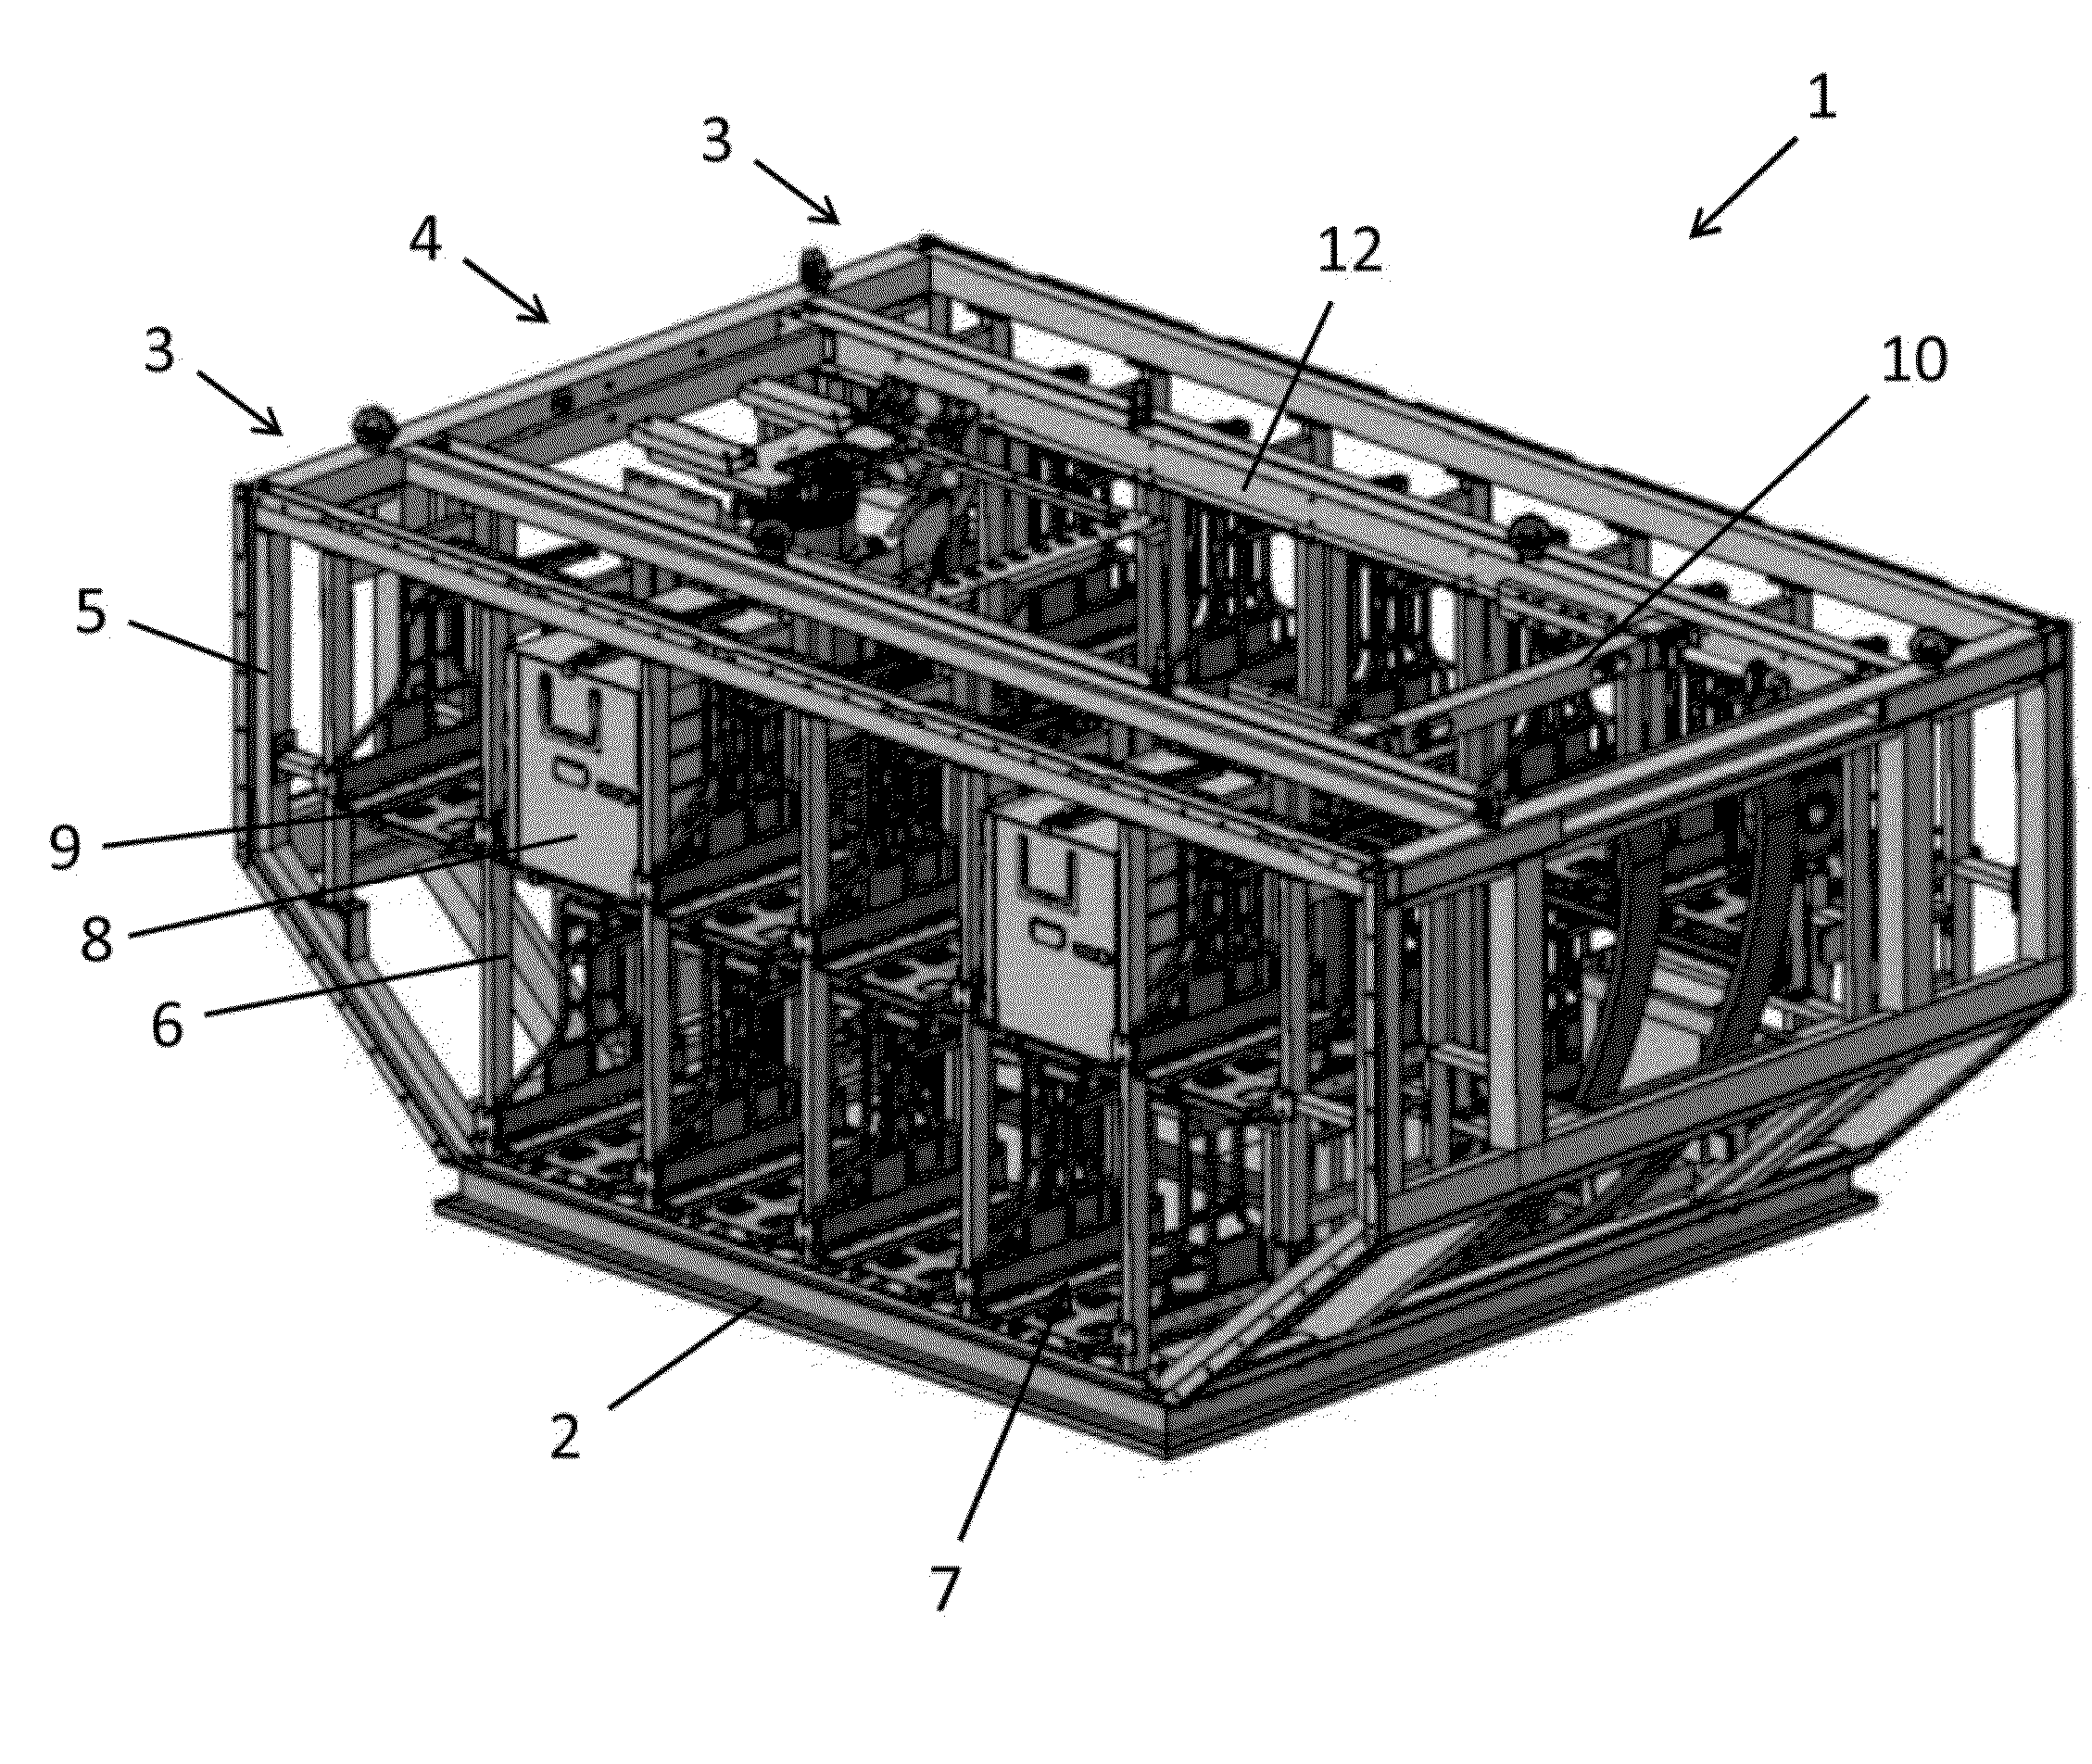 Cargo container comprising a storage rack module and a transport module